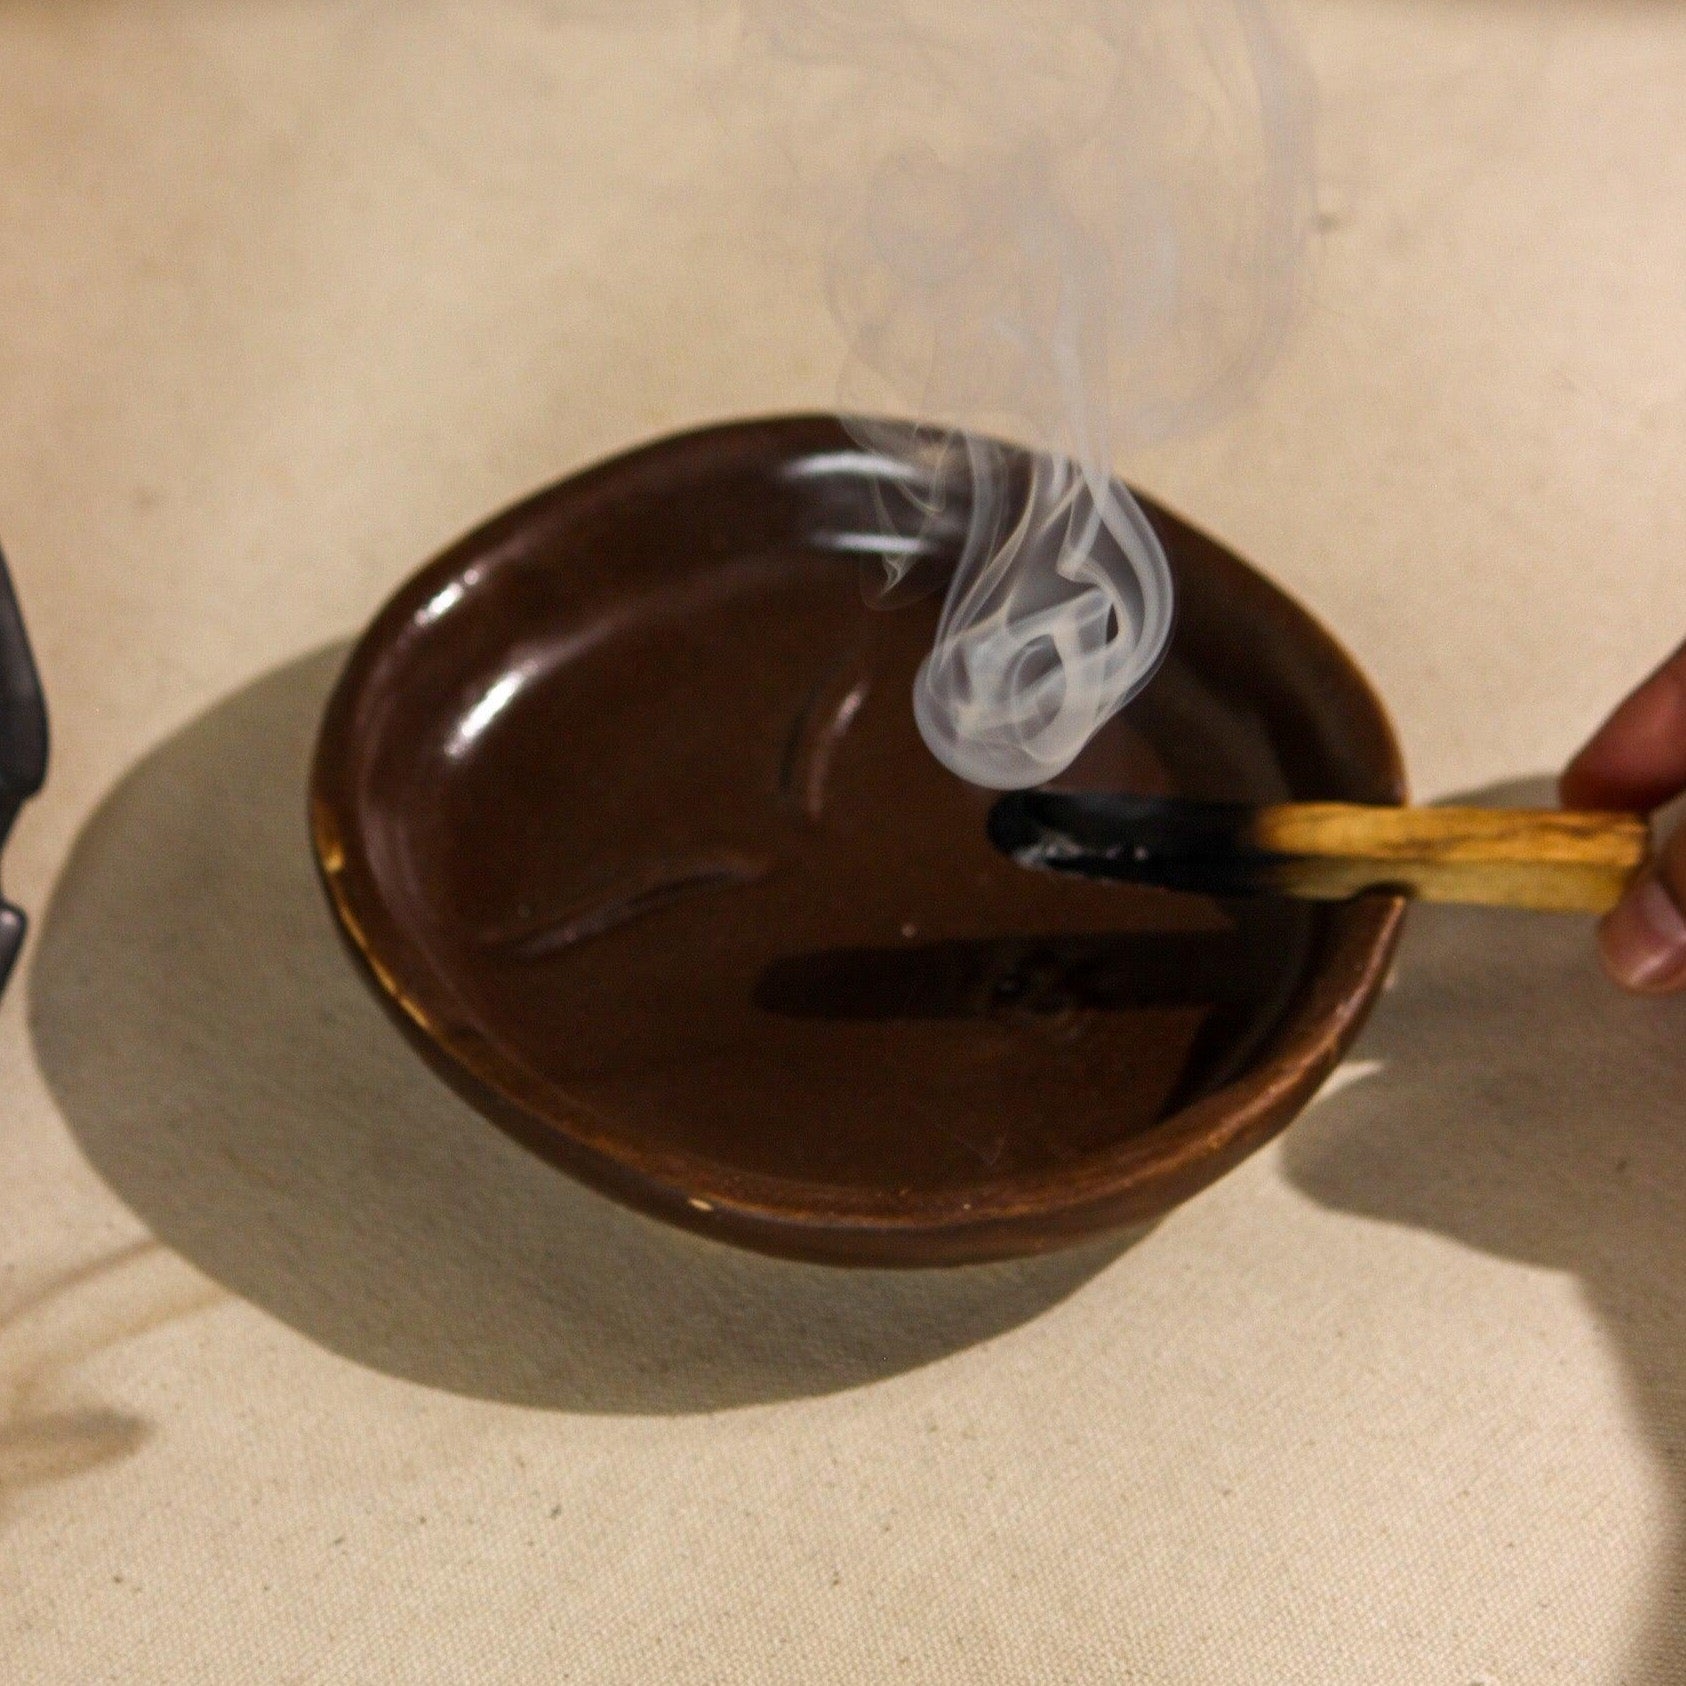 The Sage Face Ceramic Ash Tray in Black and Brown colour